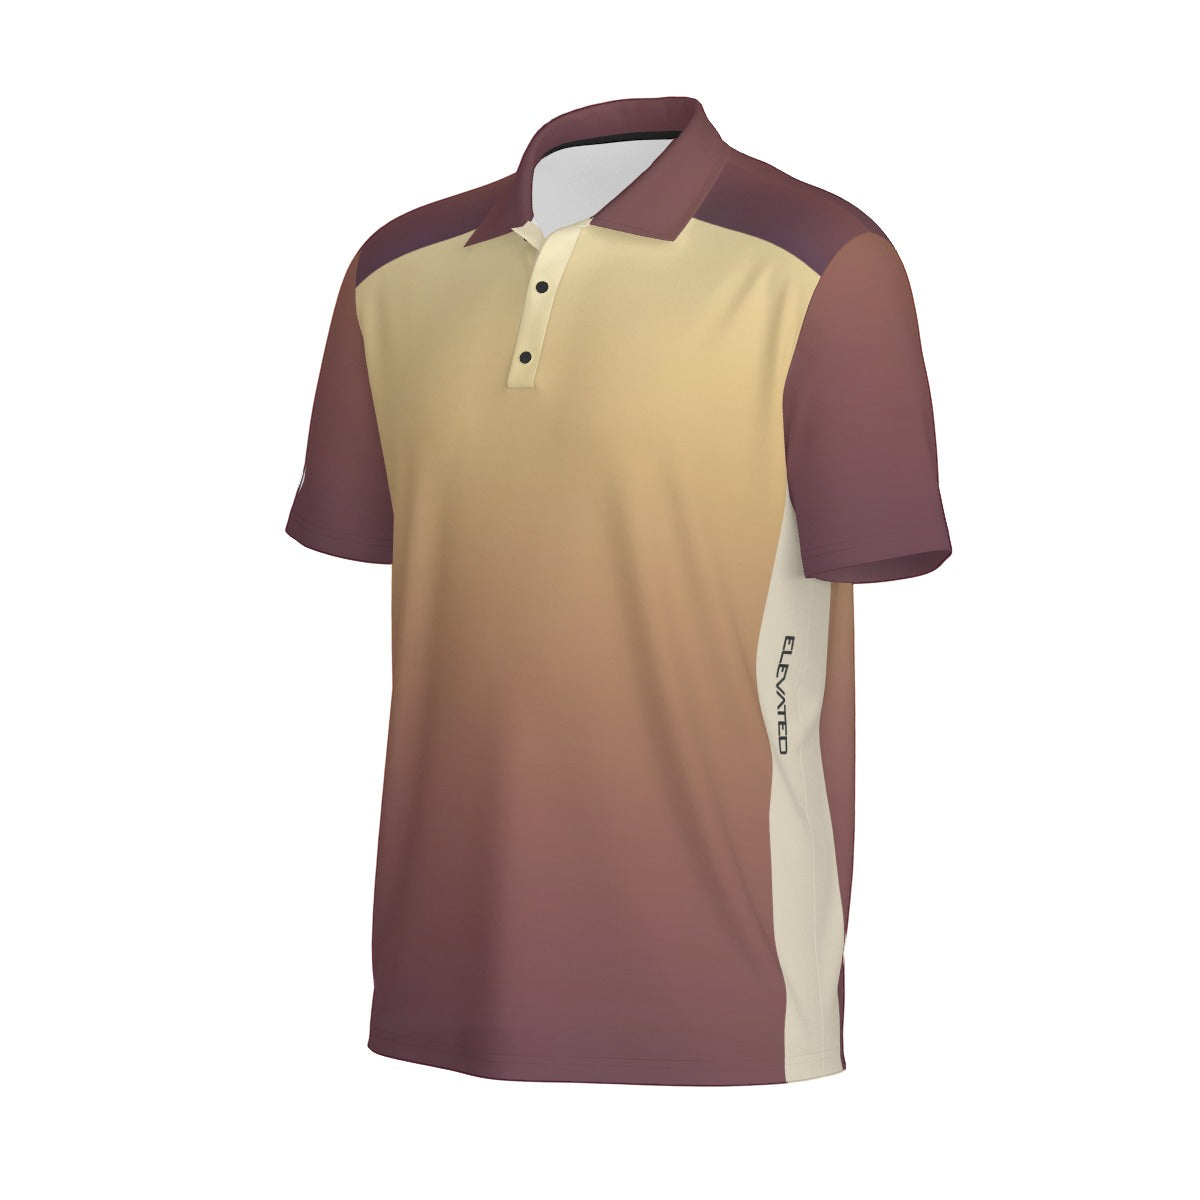 Elevated Breathable strecthy tight fitting golf polo